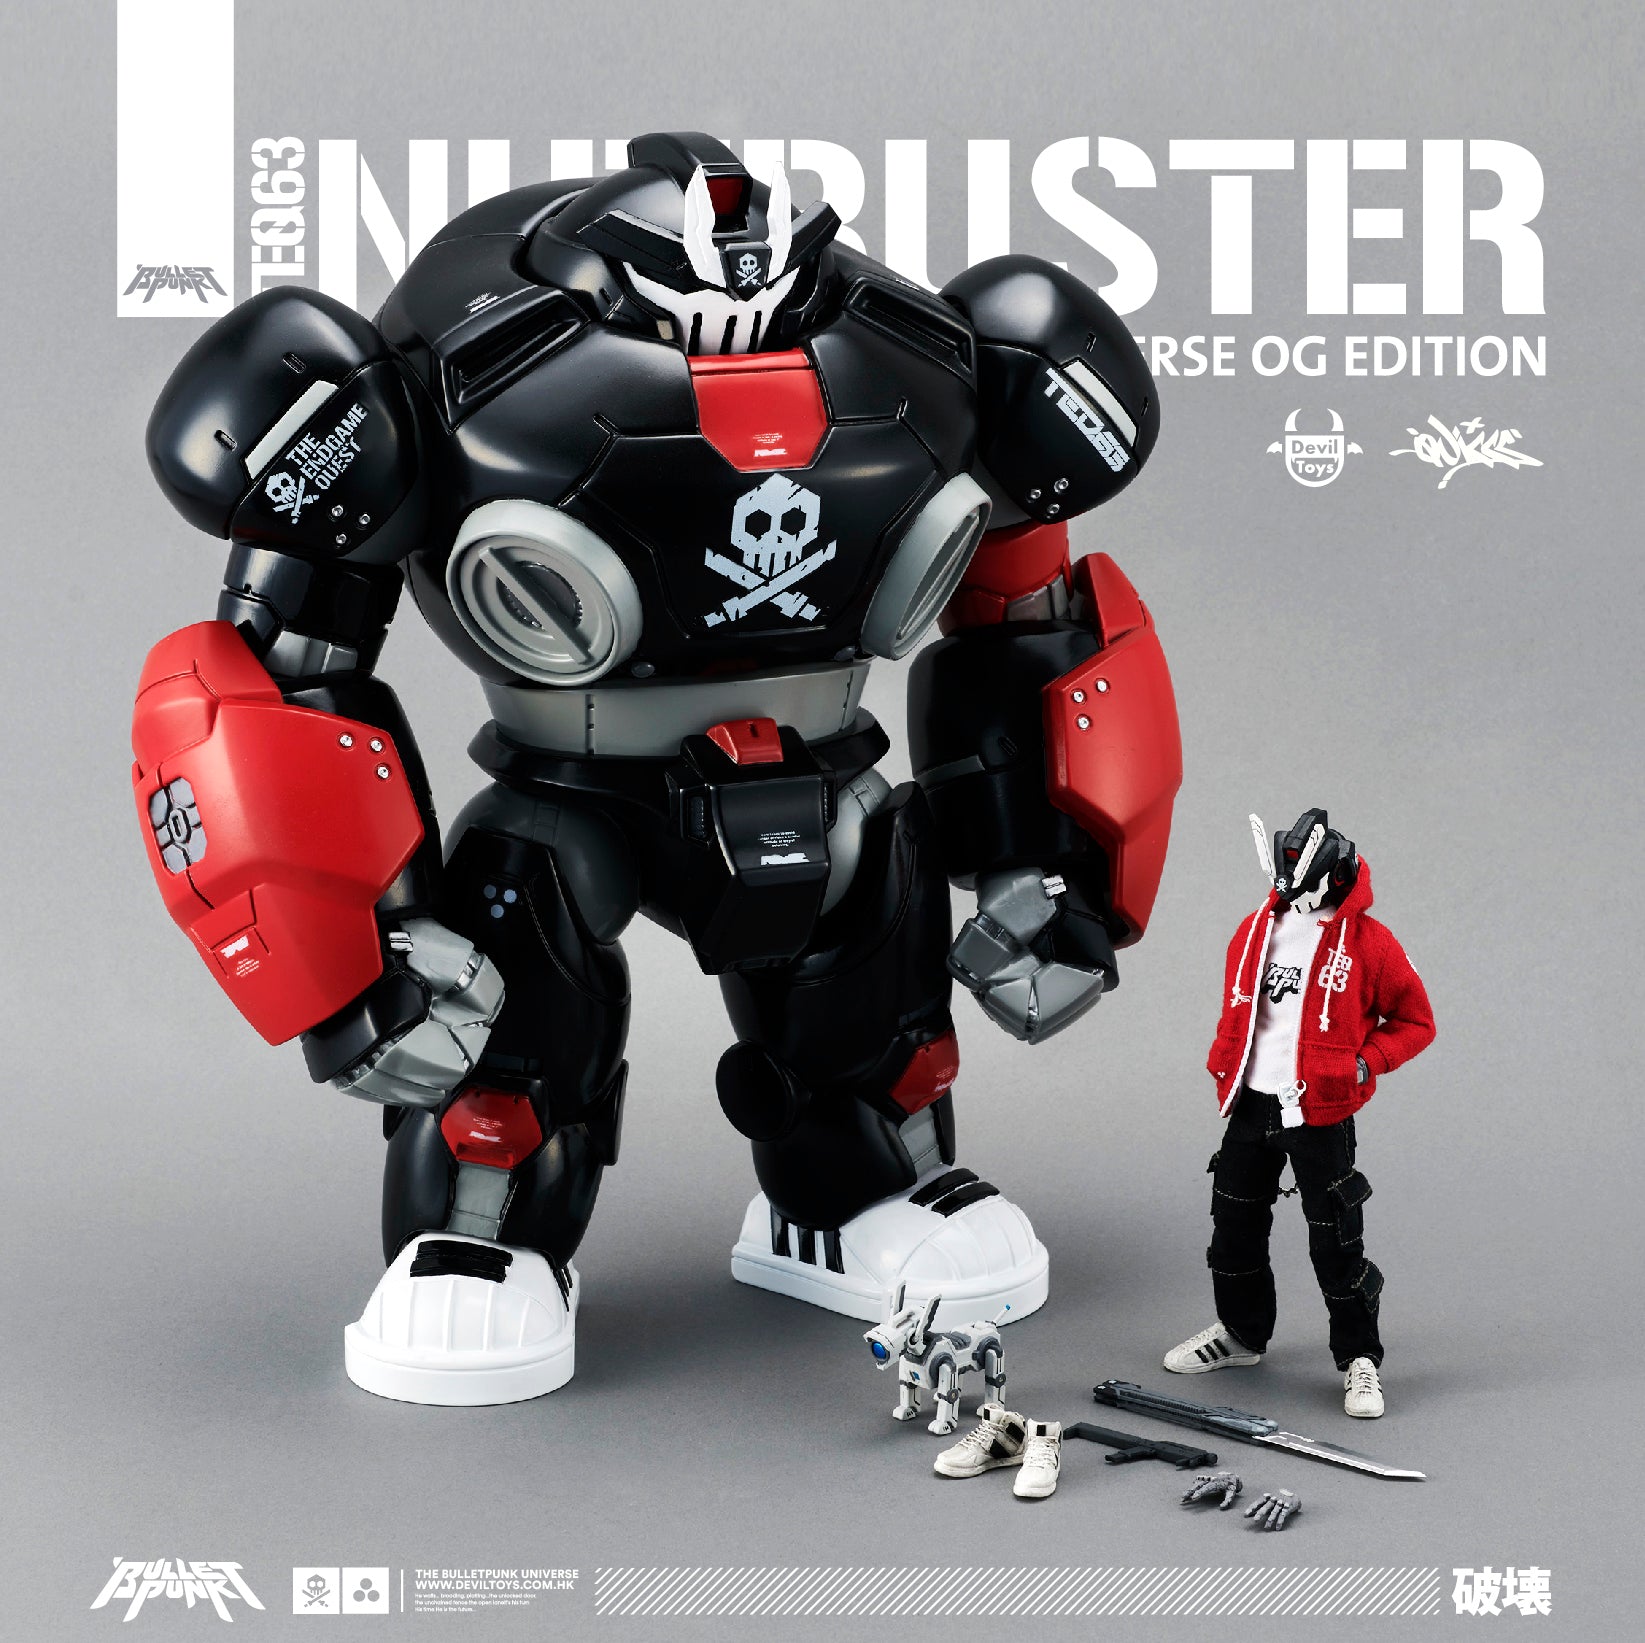 1:12 NUTBUSTER + 1:12 OG Red TEQ63 by Quiccs x Devil Toys